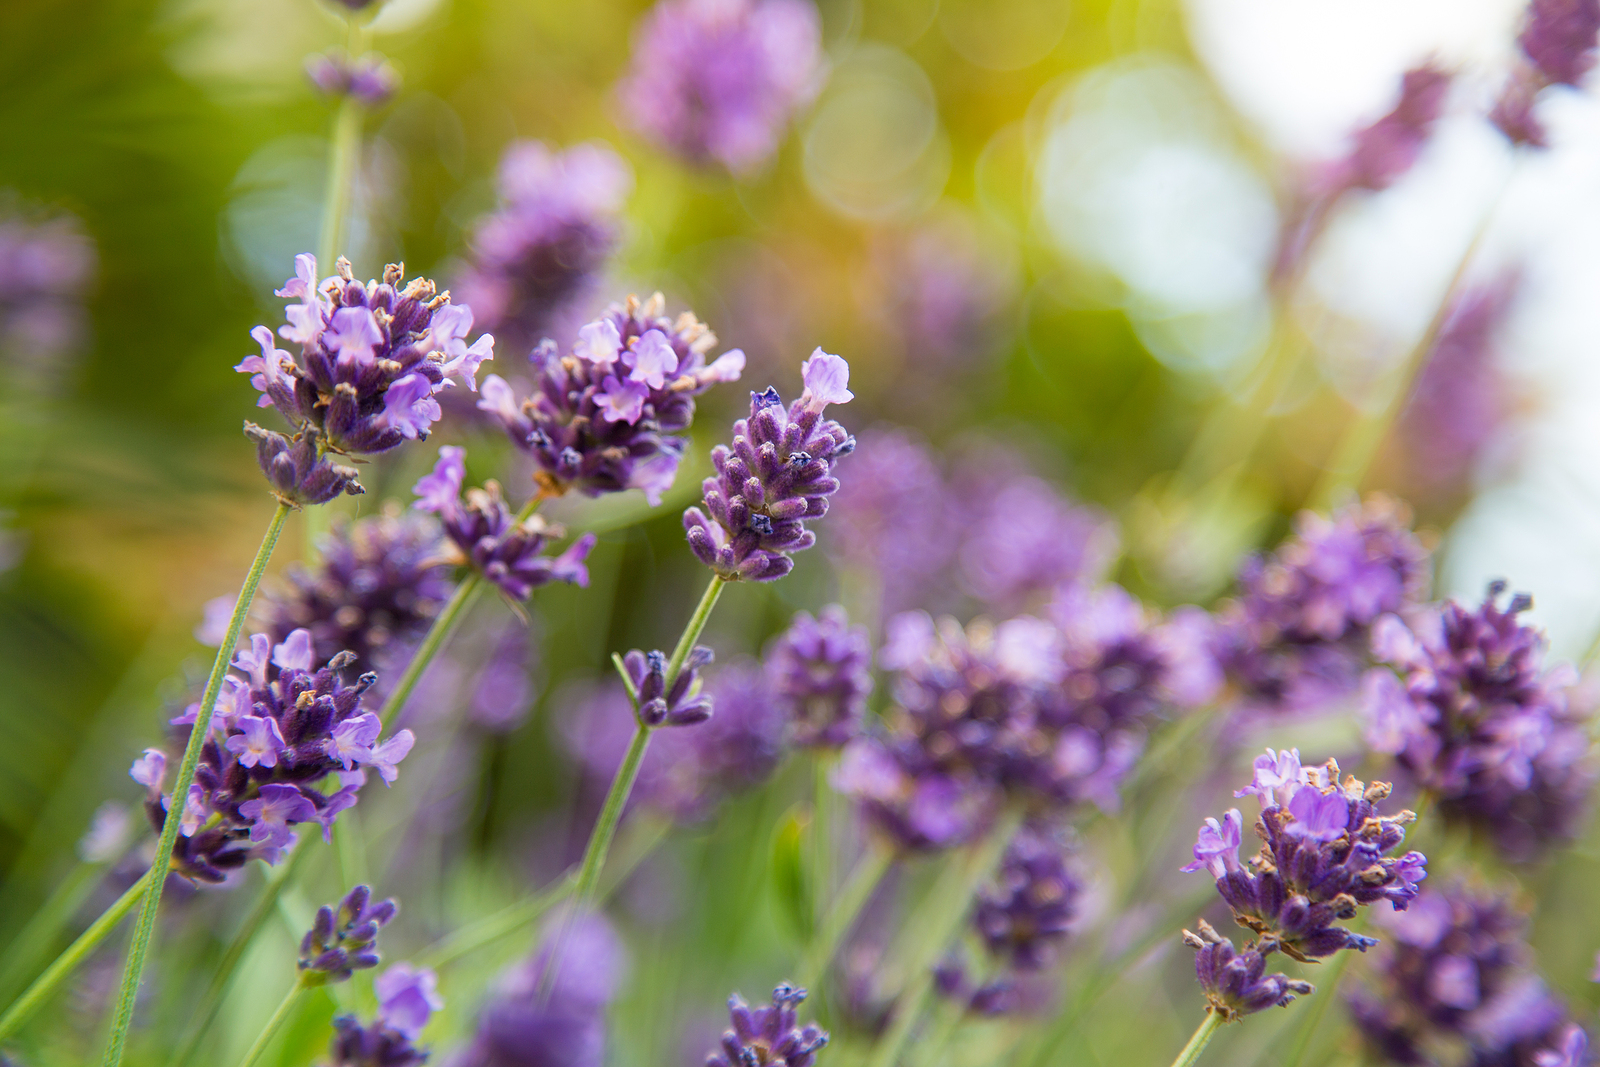 3 Ways To Preserve Your Lavender Harvest and What to Do With It